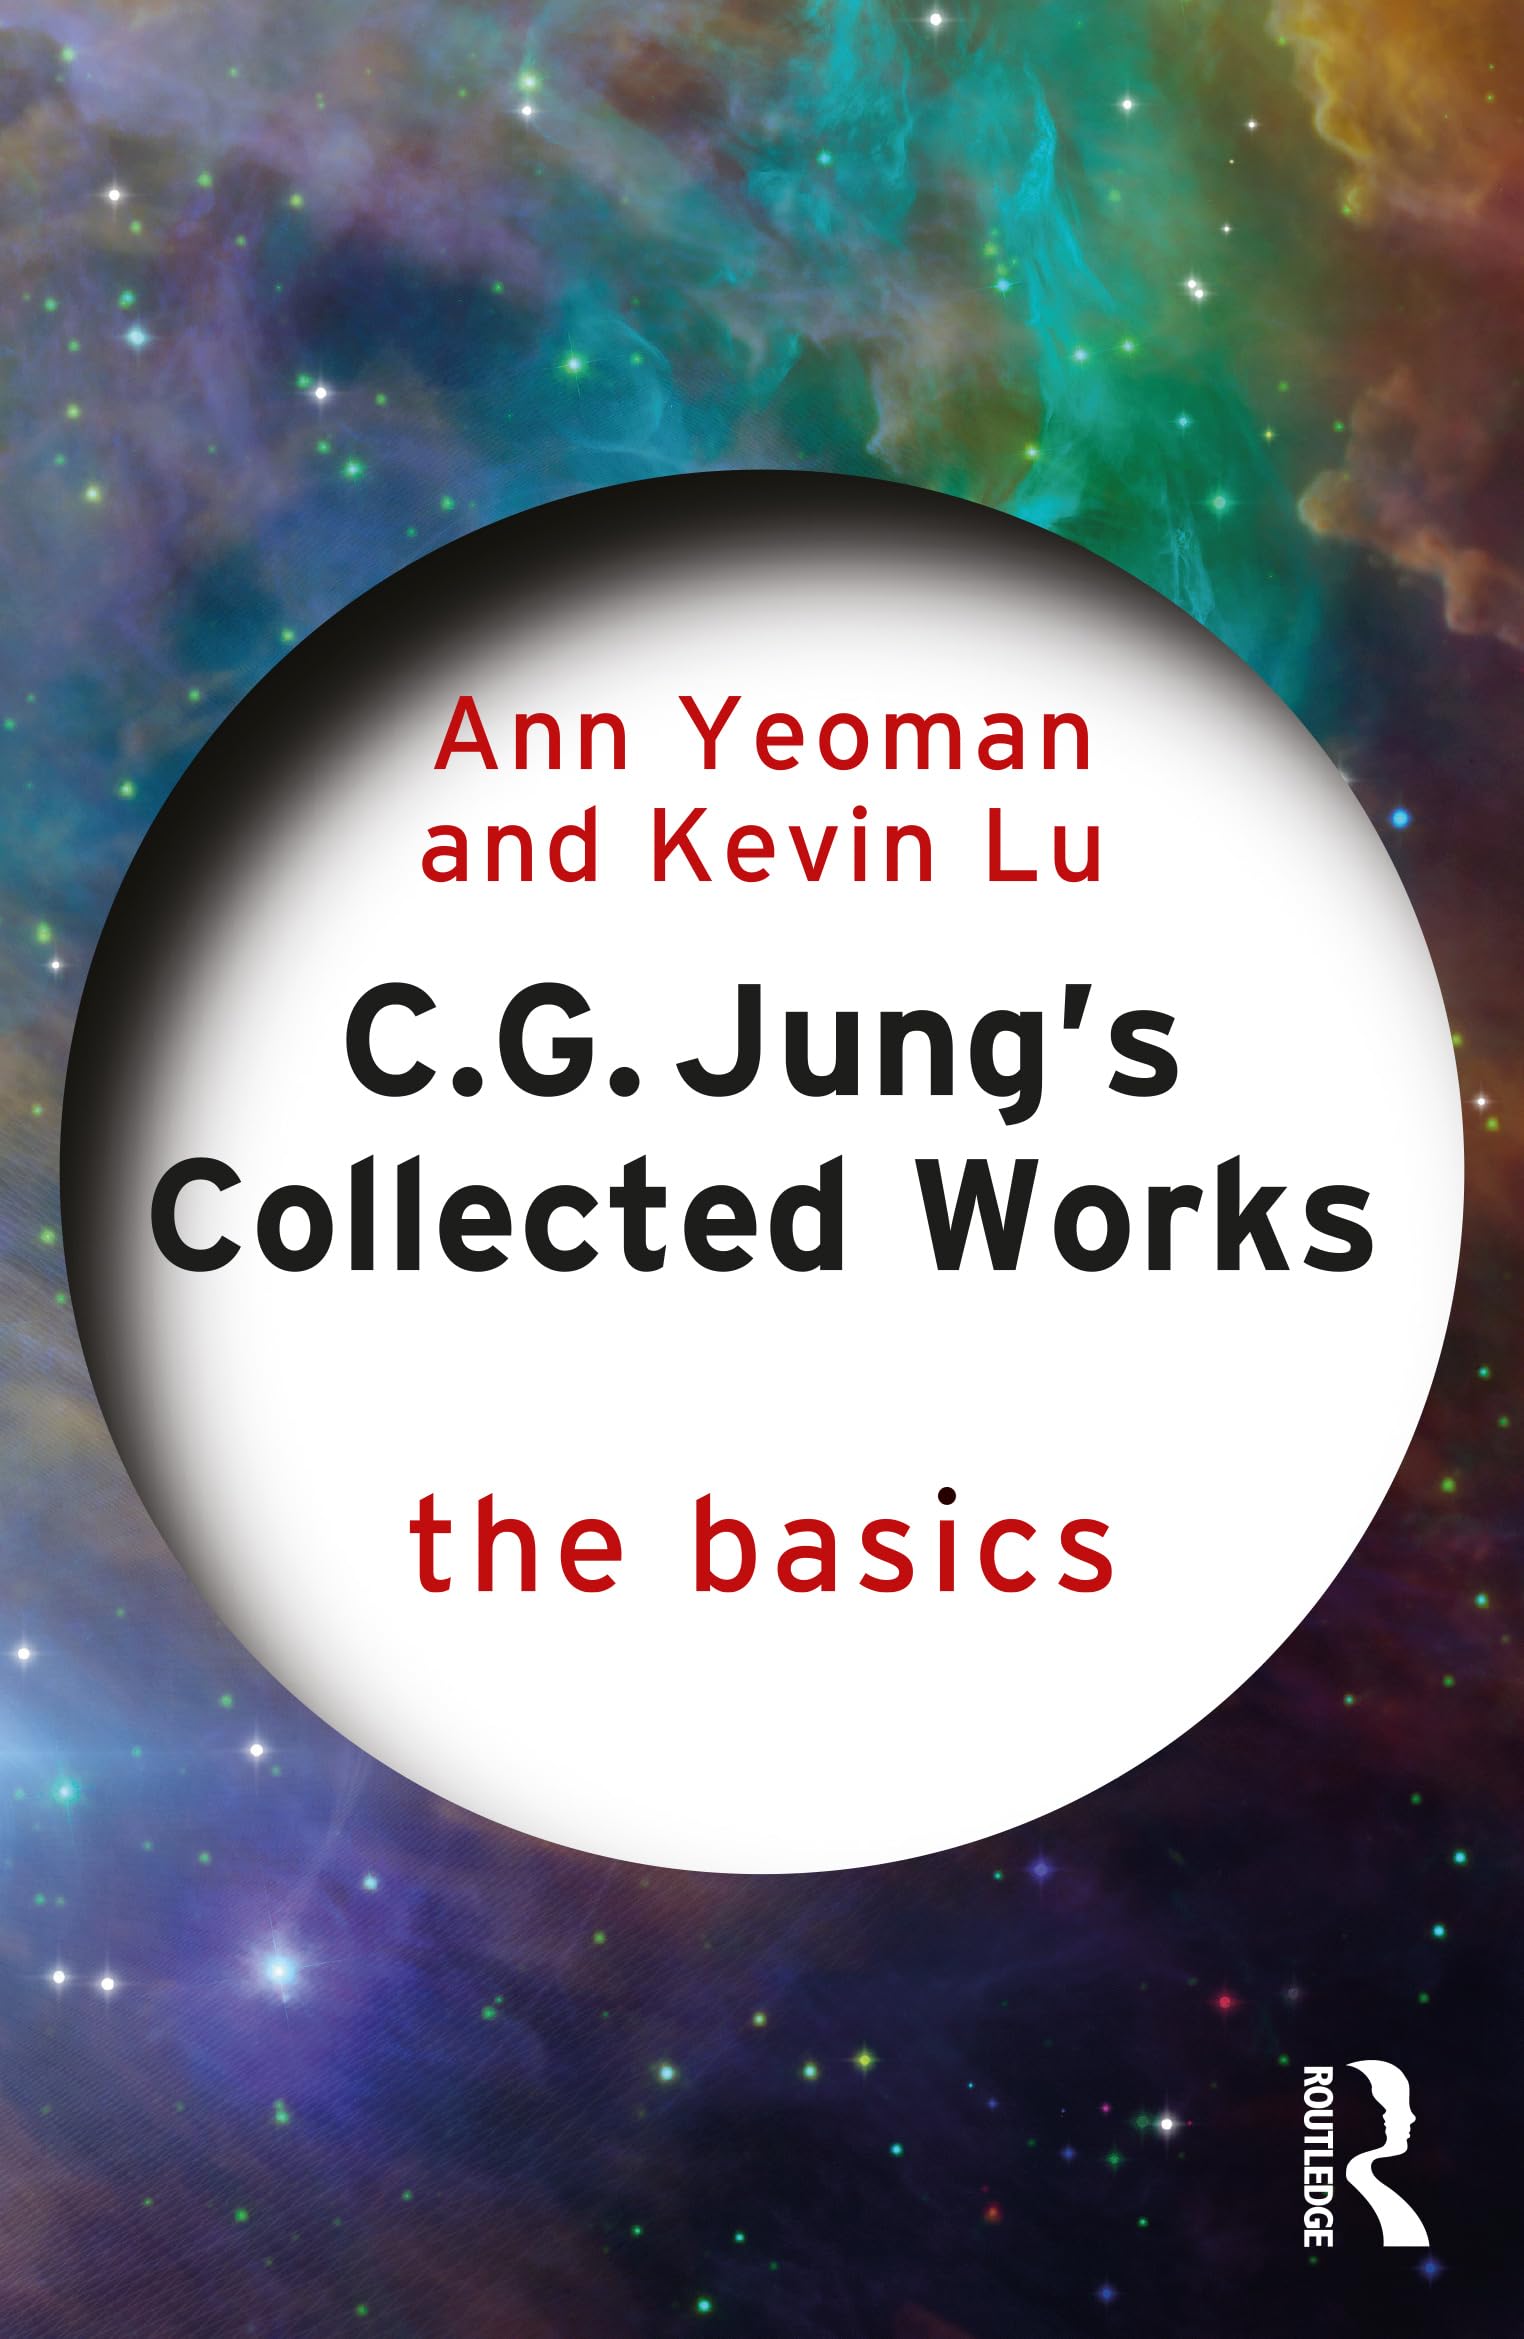 C.G. Jung's Collected Works: The Basics